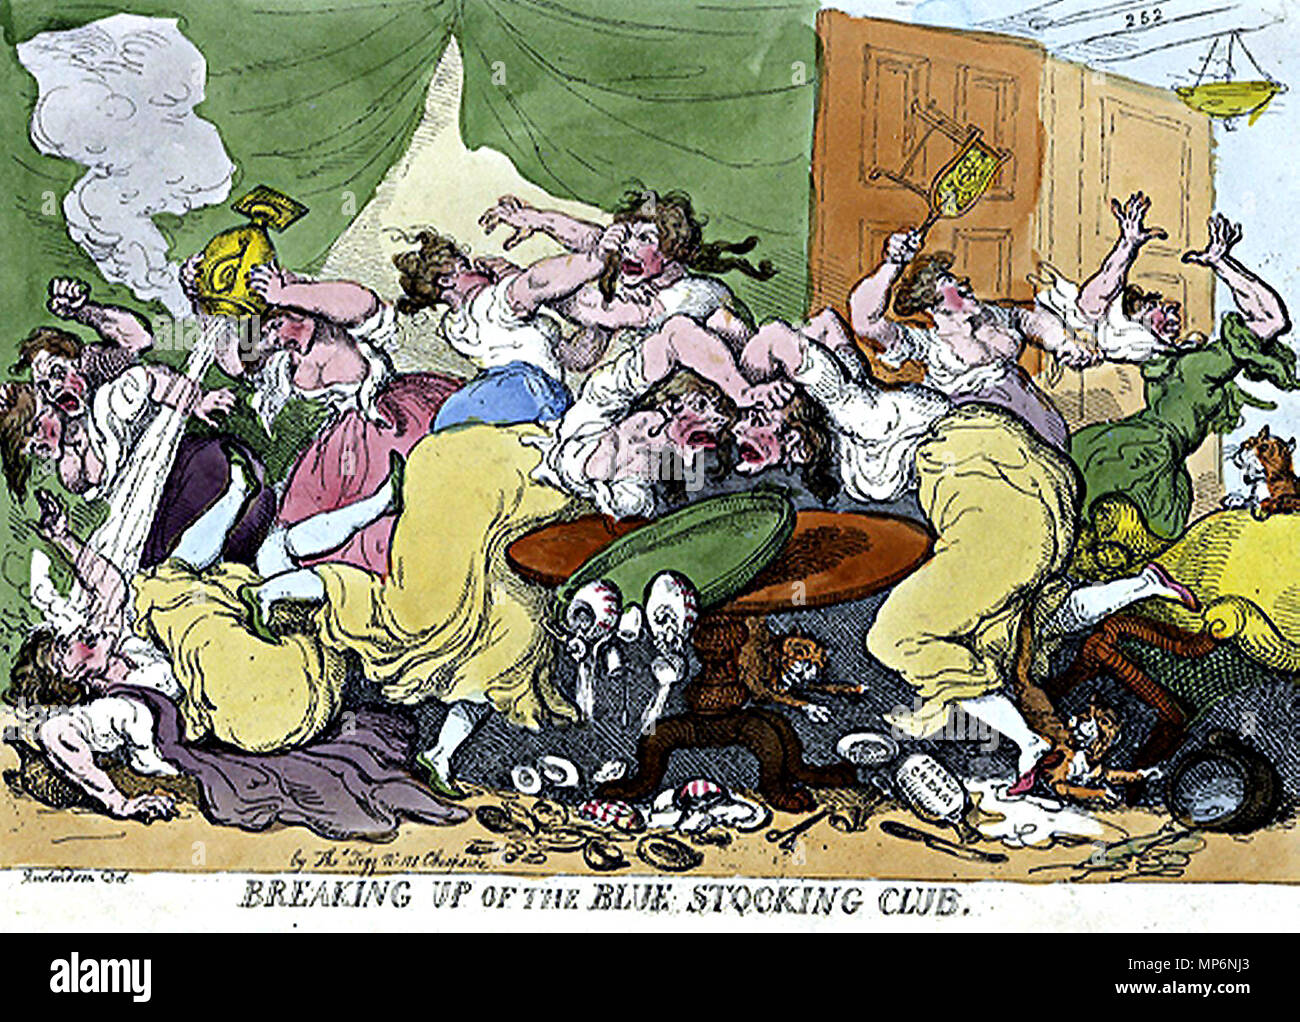 . Thomas Rowlandson (1756–1827), Breaking Up of the Blue Stocking Club. Etching, hand-colored (London: Thomas Tegg, 1815. NYPL, The Carl H. Pforzheimer Collection of Shelley and His Circle) . 1815.   Thomas Rowlandson  (1756–1827)      Description English painter, draughtsman, etcher and illustrator  Date of birth/death 14 July 1756 22 April 1827  Location of birth/death London London  Work location London, Paris (1774), France, Germany, Italy, Rotterdam (ca. 1794), Amsterdam (ca. 1794), Netherlands (ca. 1794)  Authority control  : Q318584 VIAF: 56672964 ISNI: 0000 0001 2134 1830 ULAN: 5000069 Stock Photo